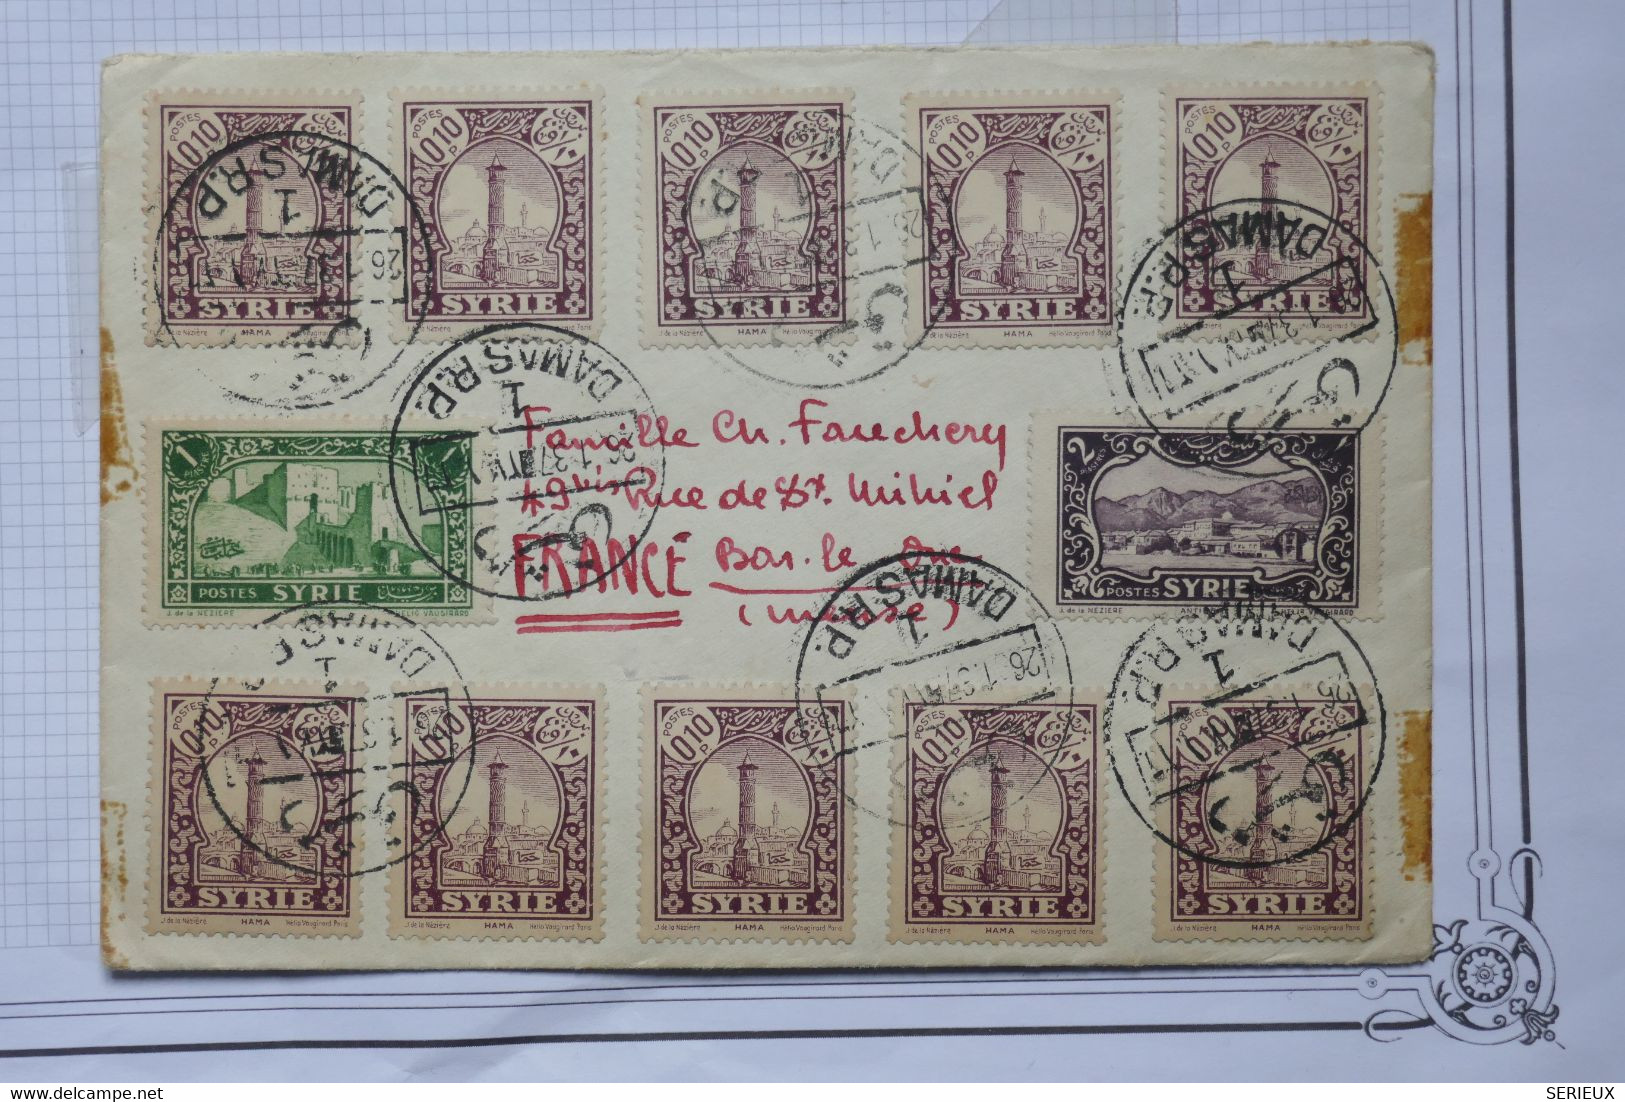 BE14  SYRIE  BELLE LETTRE RARE  1937 DAMAS A BAR LE DUC   FRANCE +LLYOD TRIESTINO+++AFFRANCH. INTERESSANT - Storia Postale